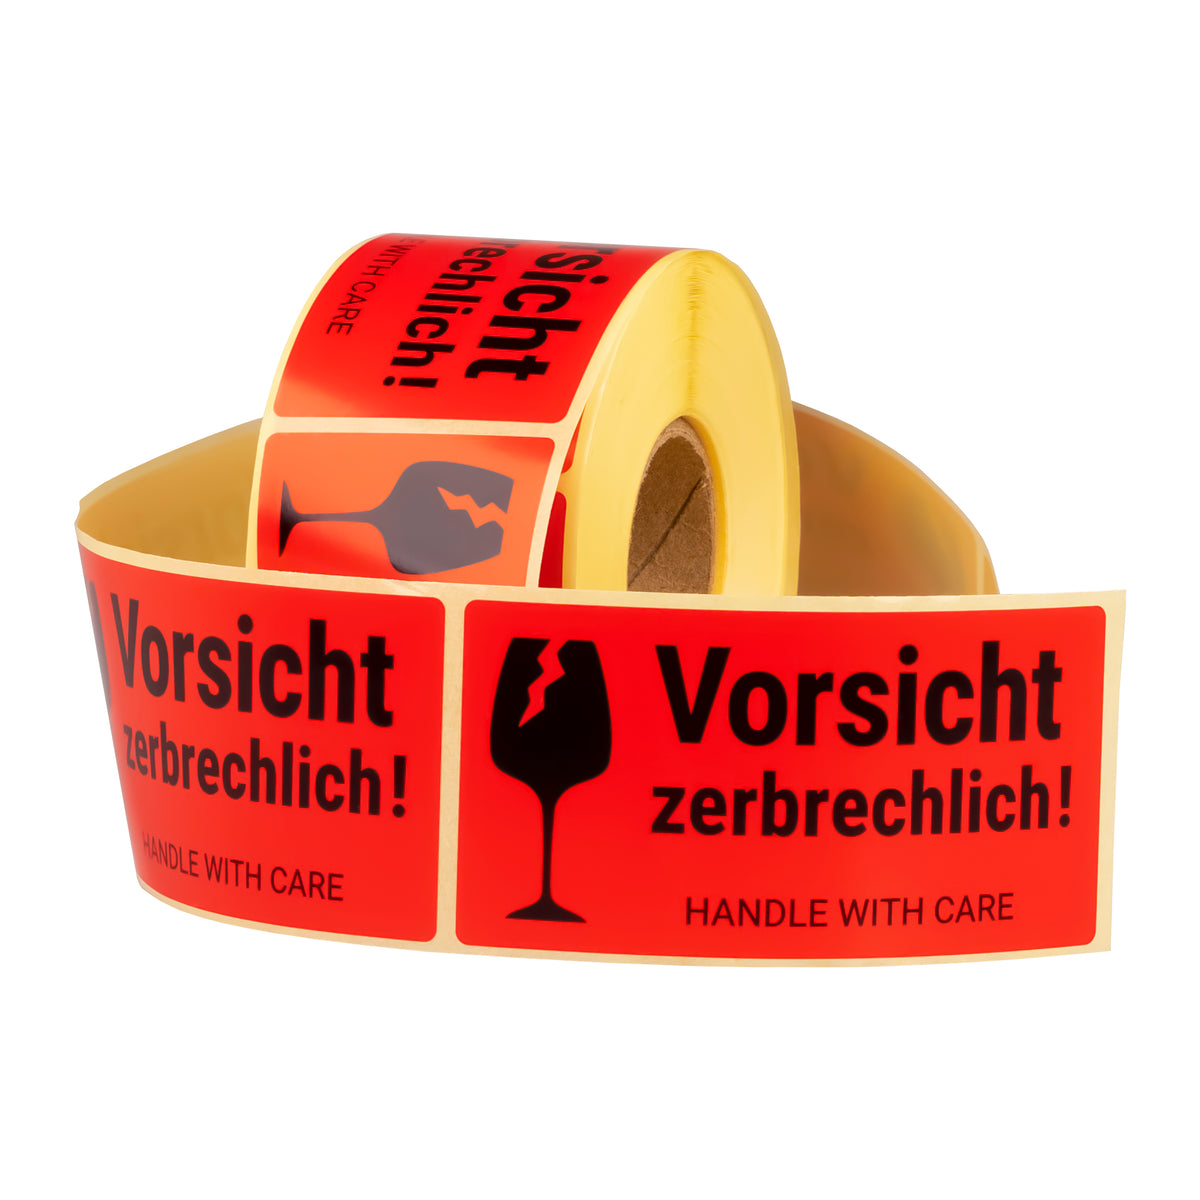 Warning Labels on Roll 100 x 50 mm Vorsicht zerbrechlich! Handle with care 500 pcs